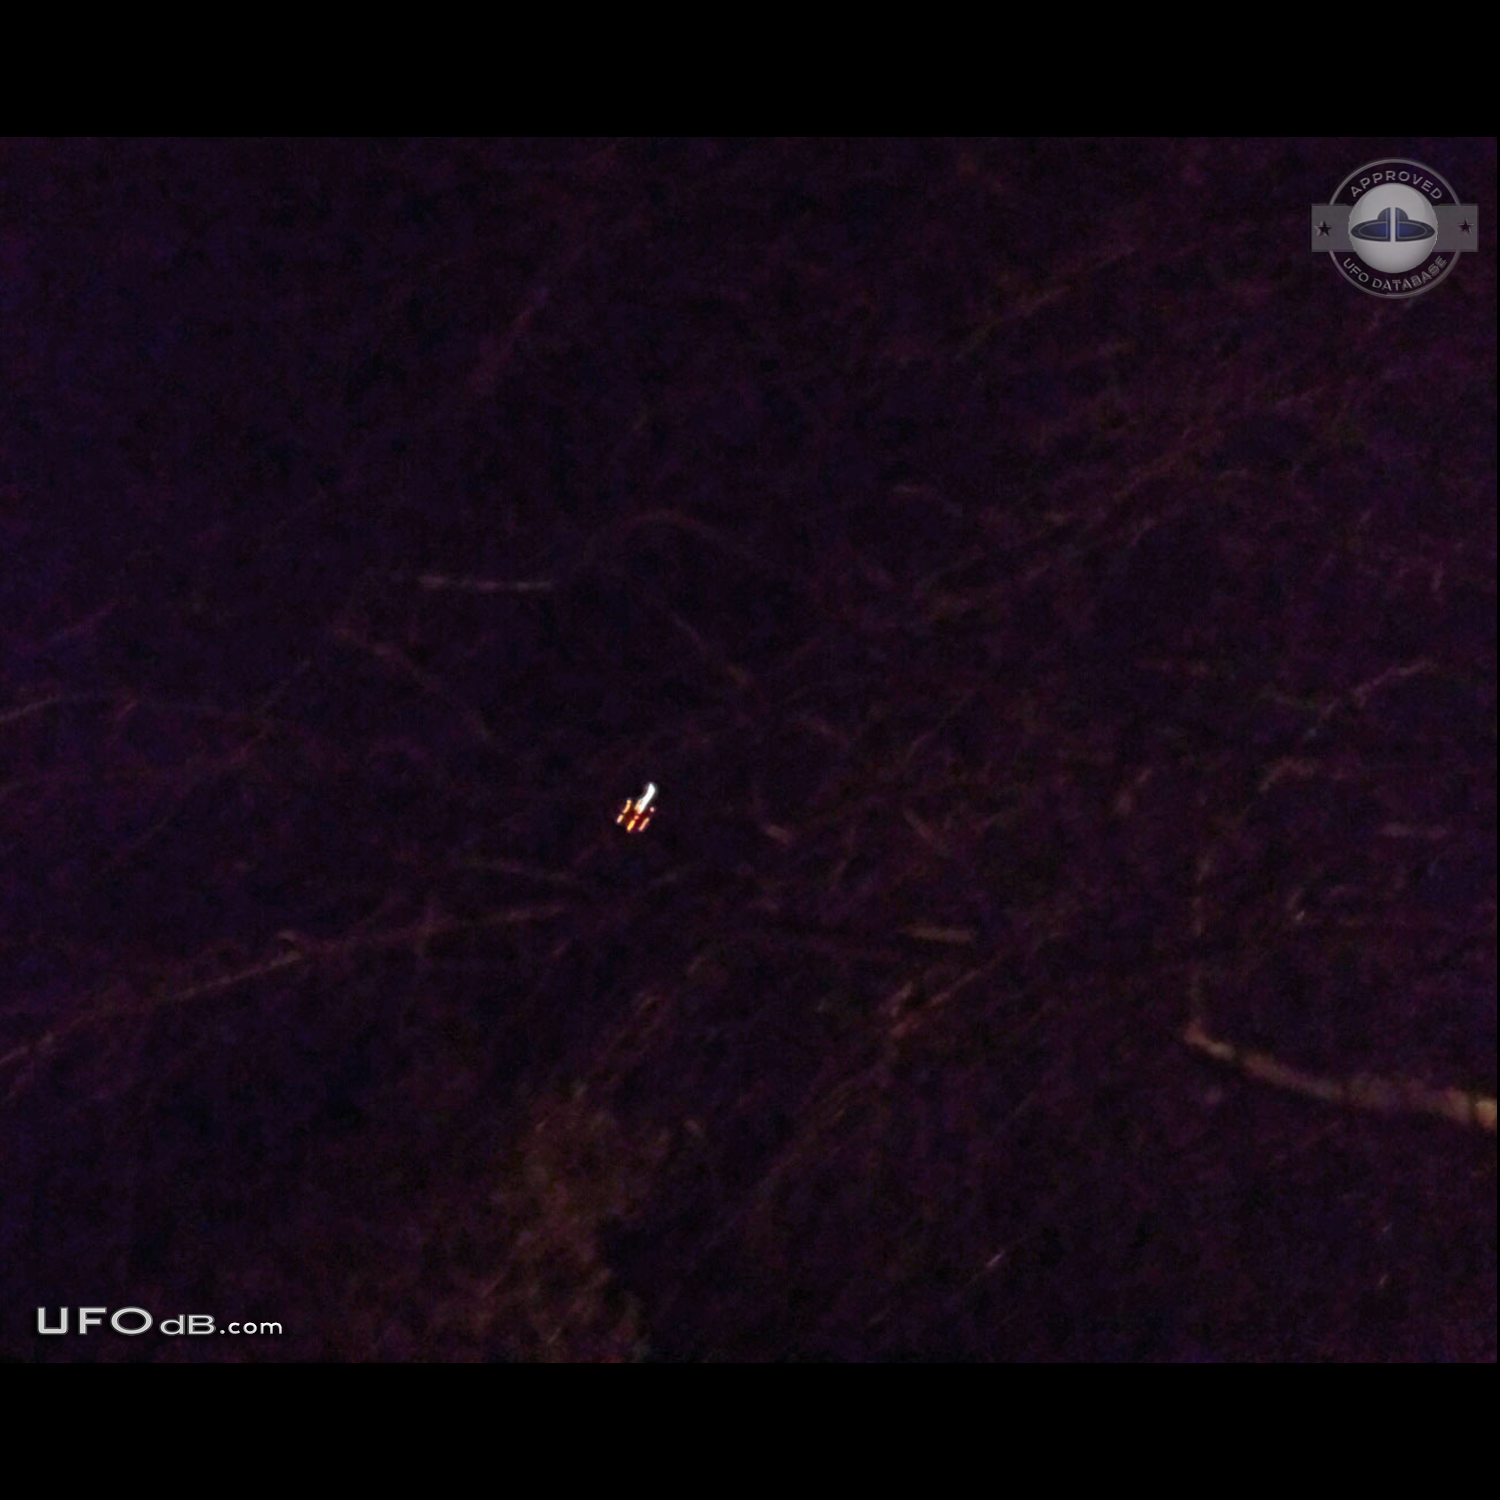 Strange object in the sky of Timmins Ontario Canada on January 22 2015 UFO Picture #581-1